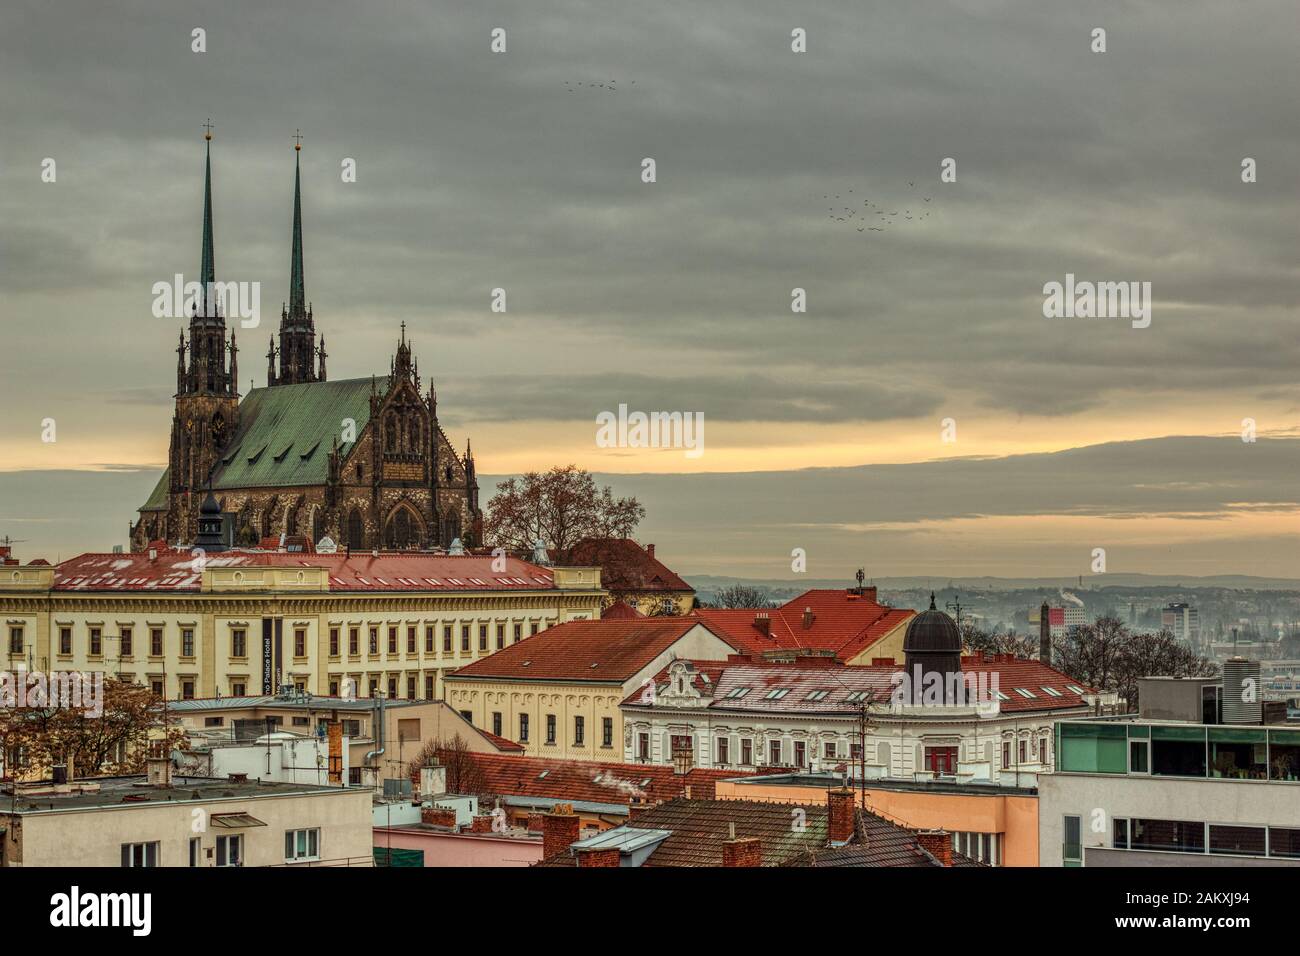 Brno Czech Republic January 10 of 2020 - Cathedral of St. Peter and Paul under autumn clouds with light snow on houses buildings on beautiful sunset Stock Photo